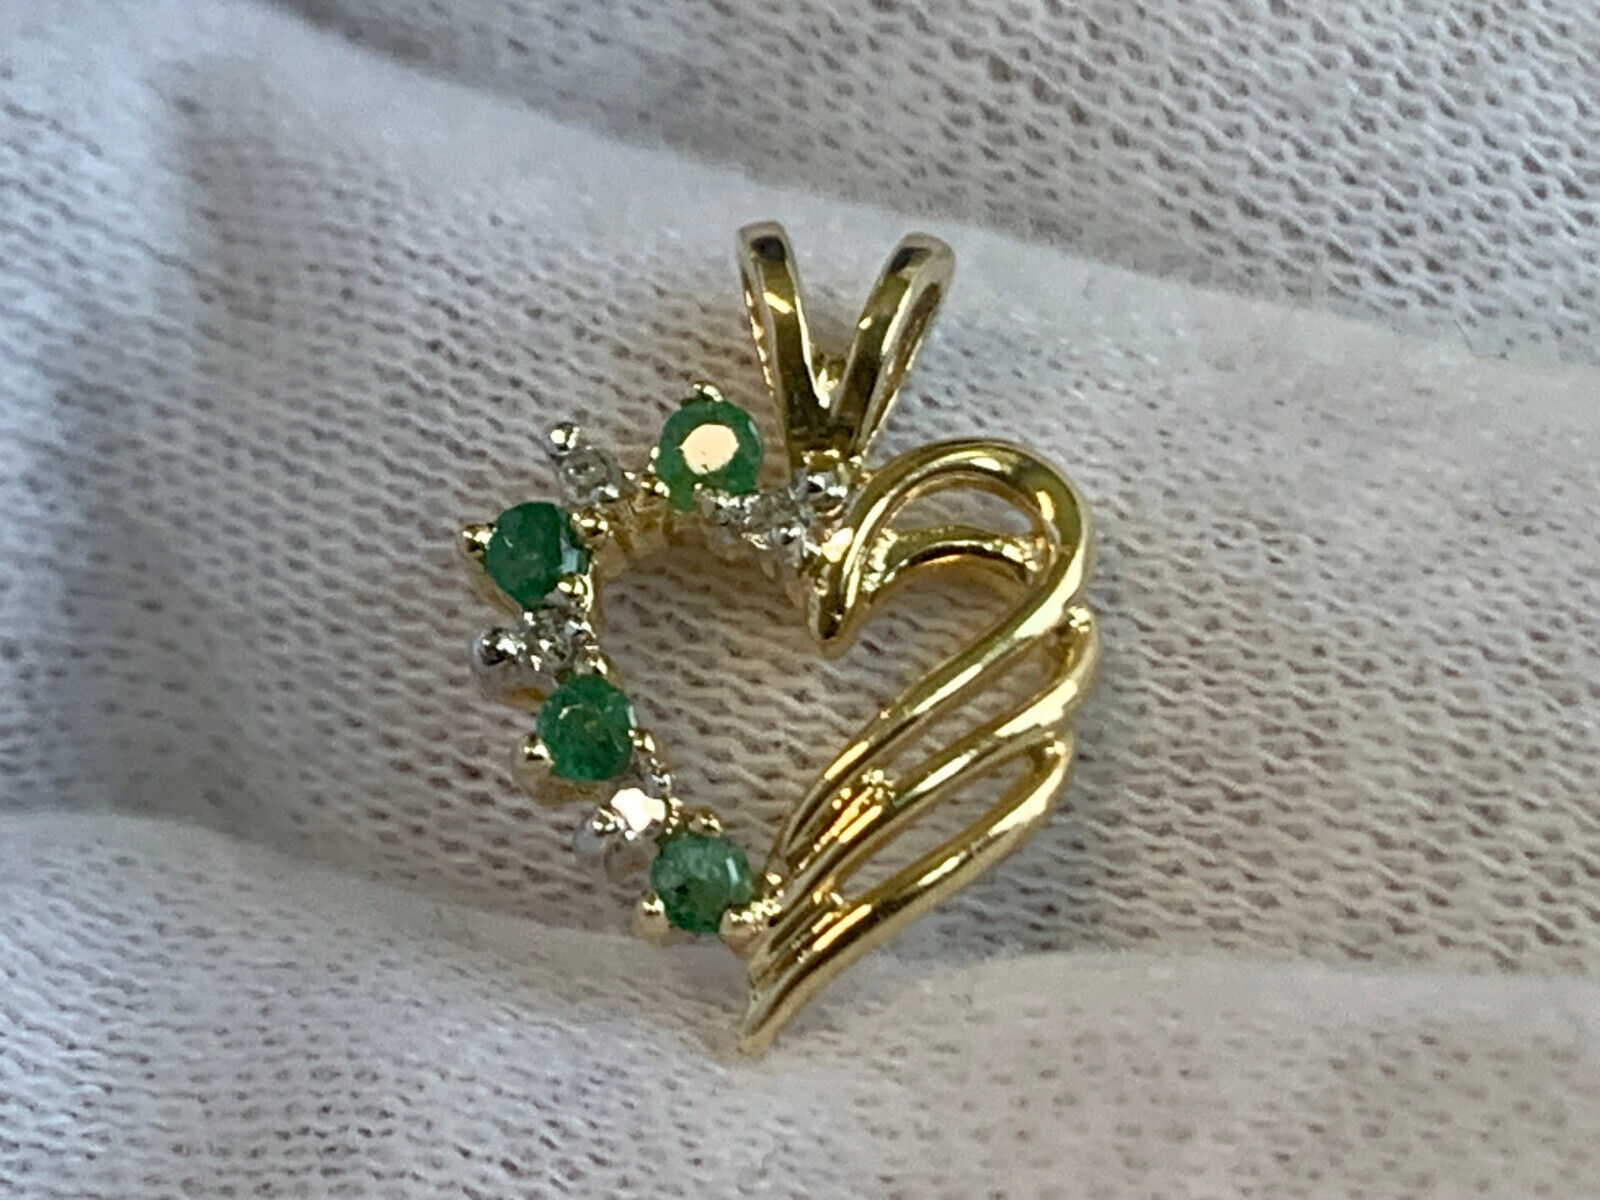 10K Yellow Gold Heart Pendant 1.16g Fine Jewelry Clear & Emerald Color Stones - $69.25